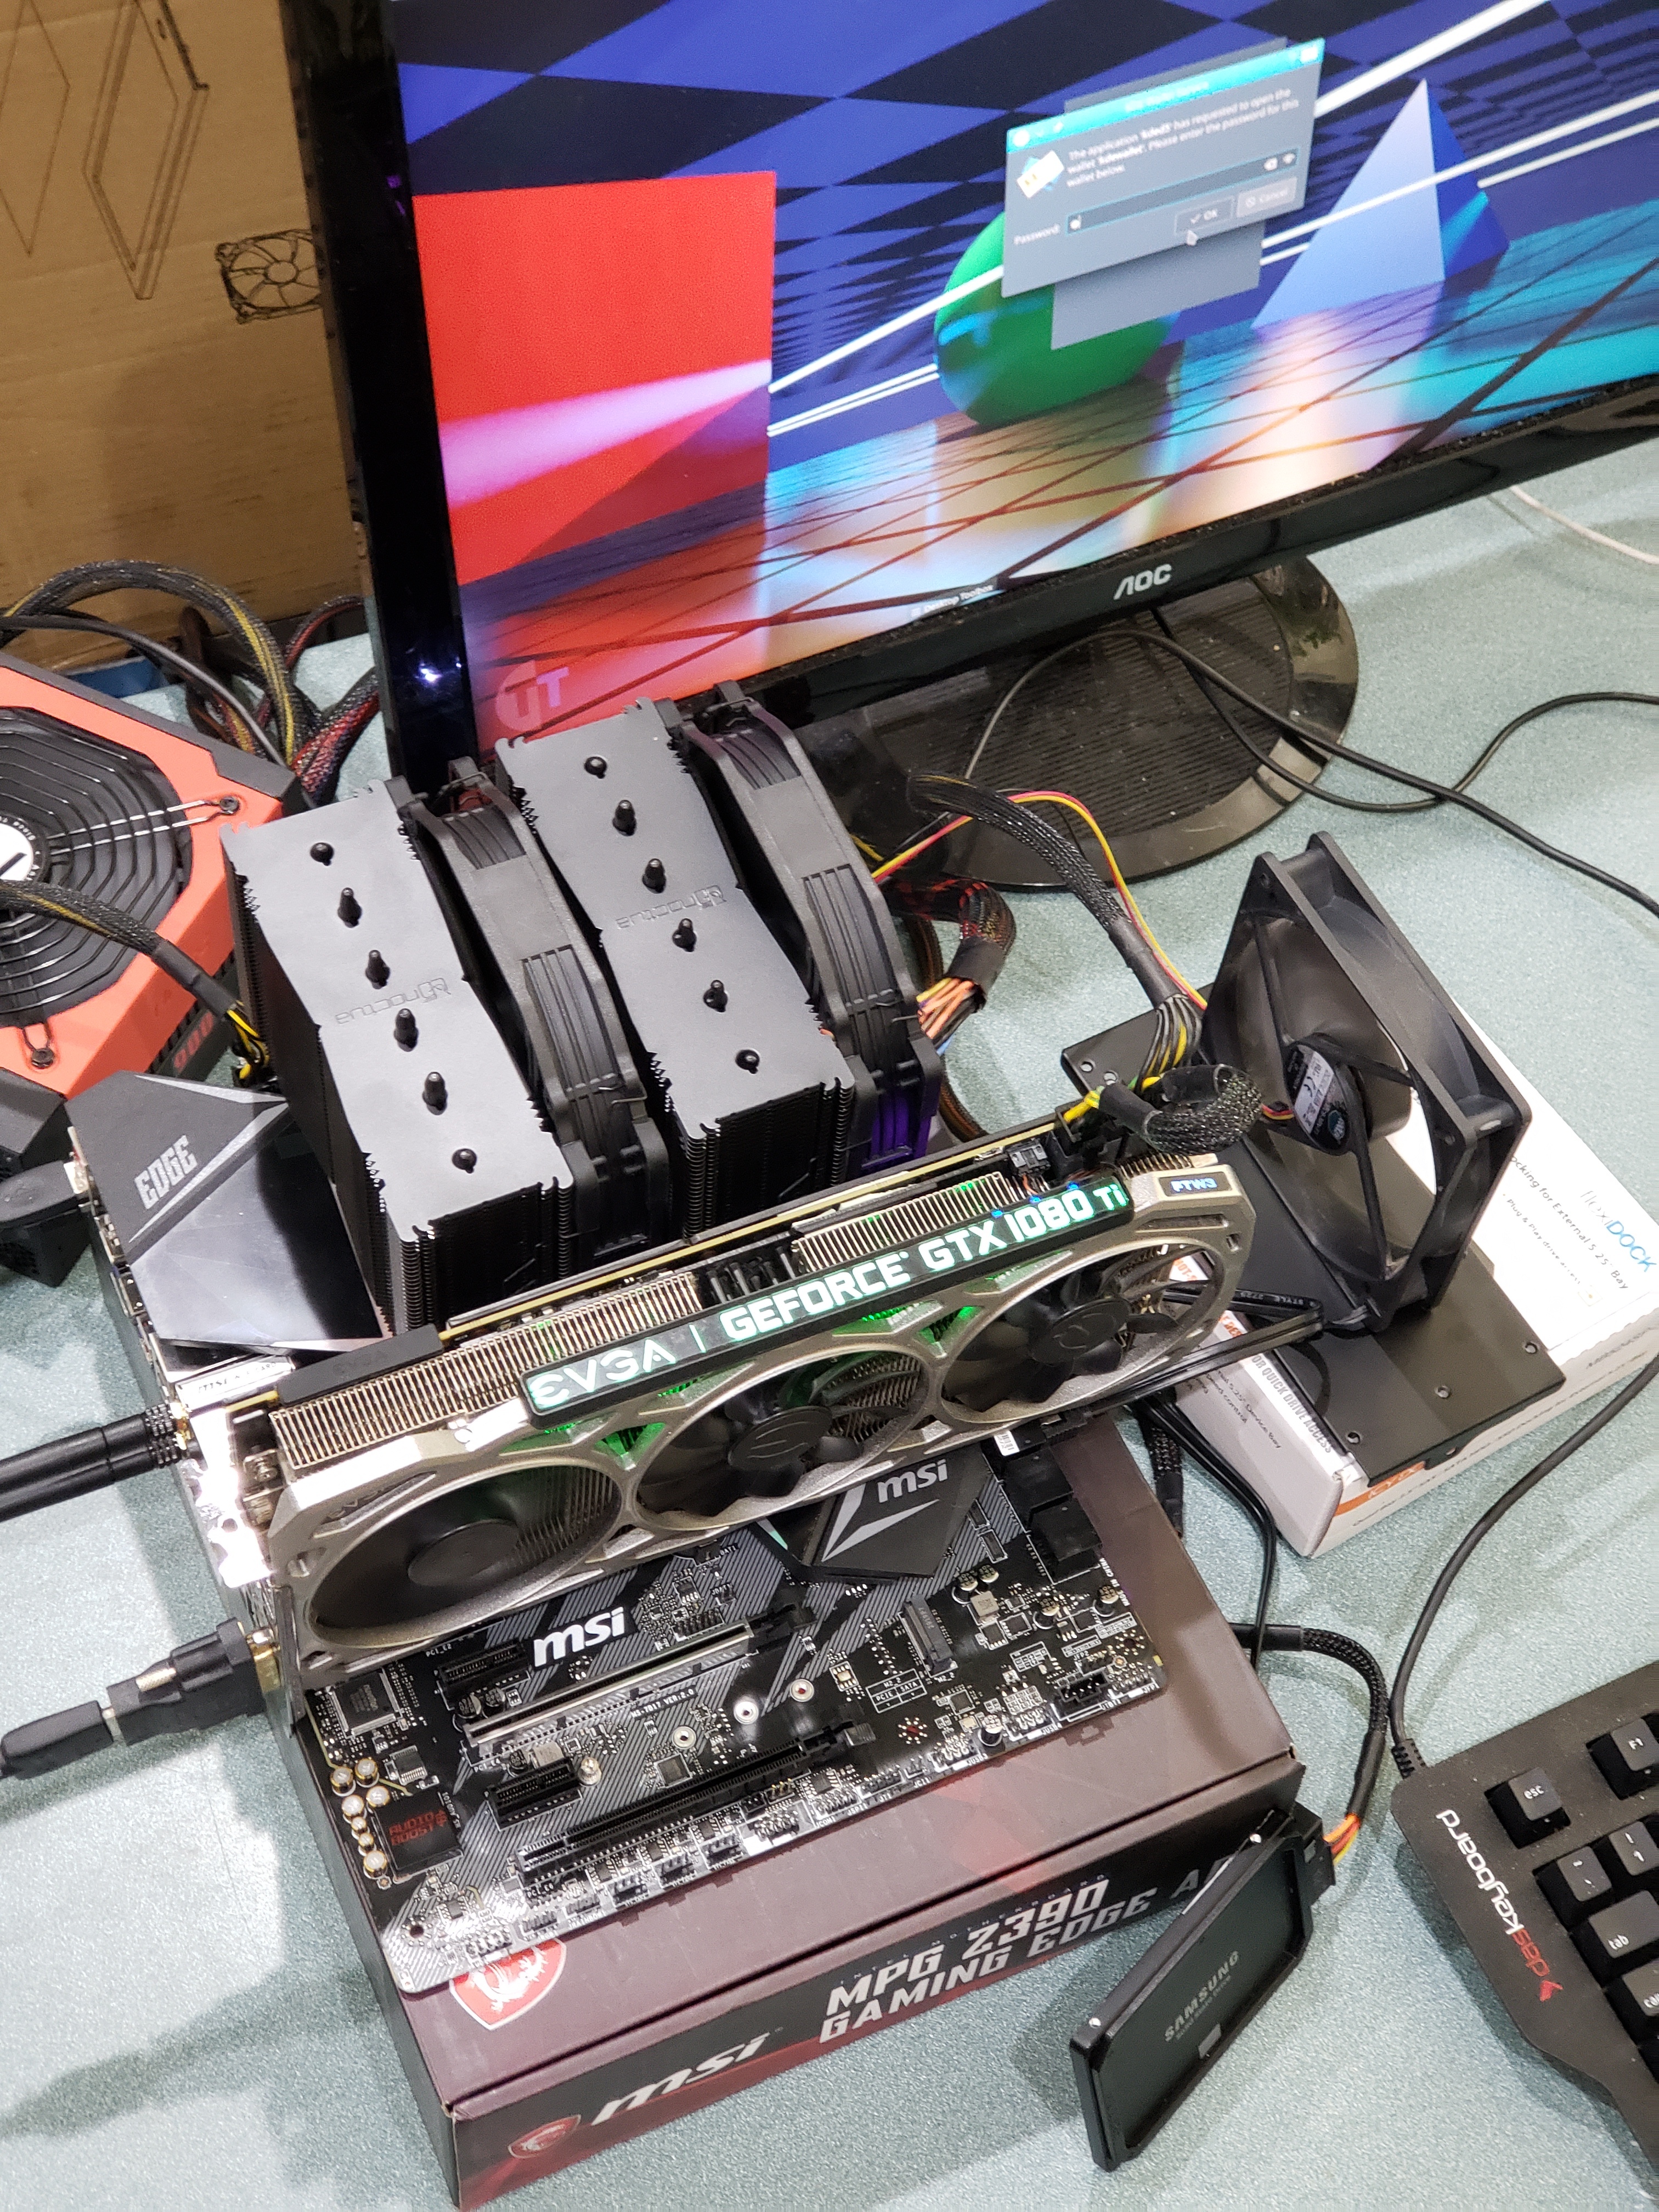 Who said Cable Management on the LEVEL 10 GT was Tough? - Build a PC -  Level1Techs Forums